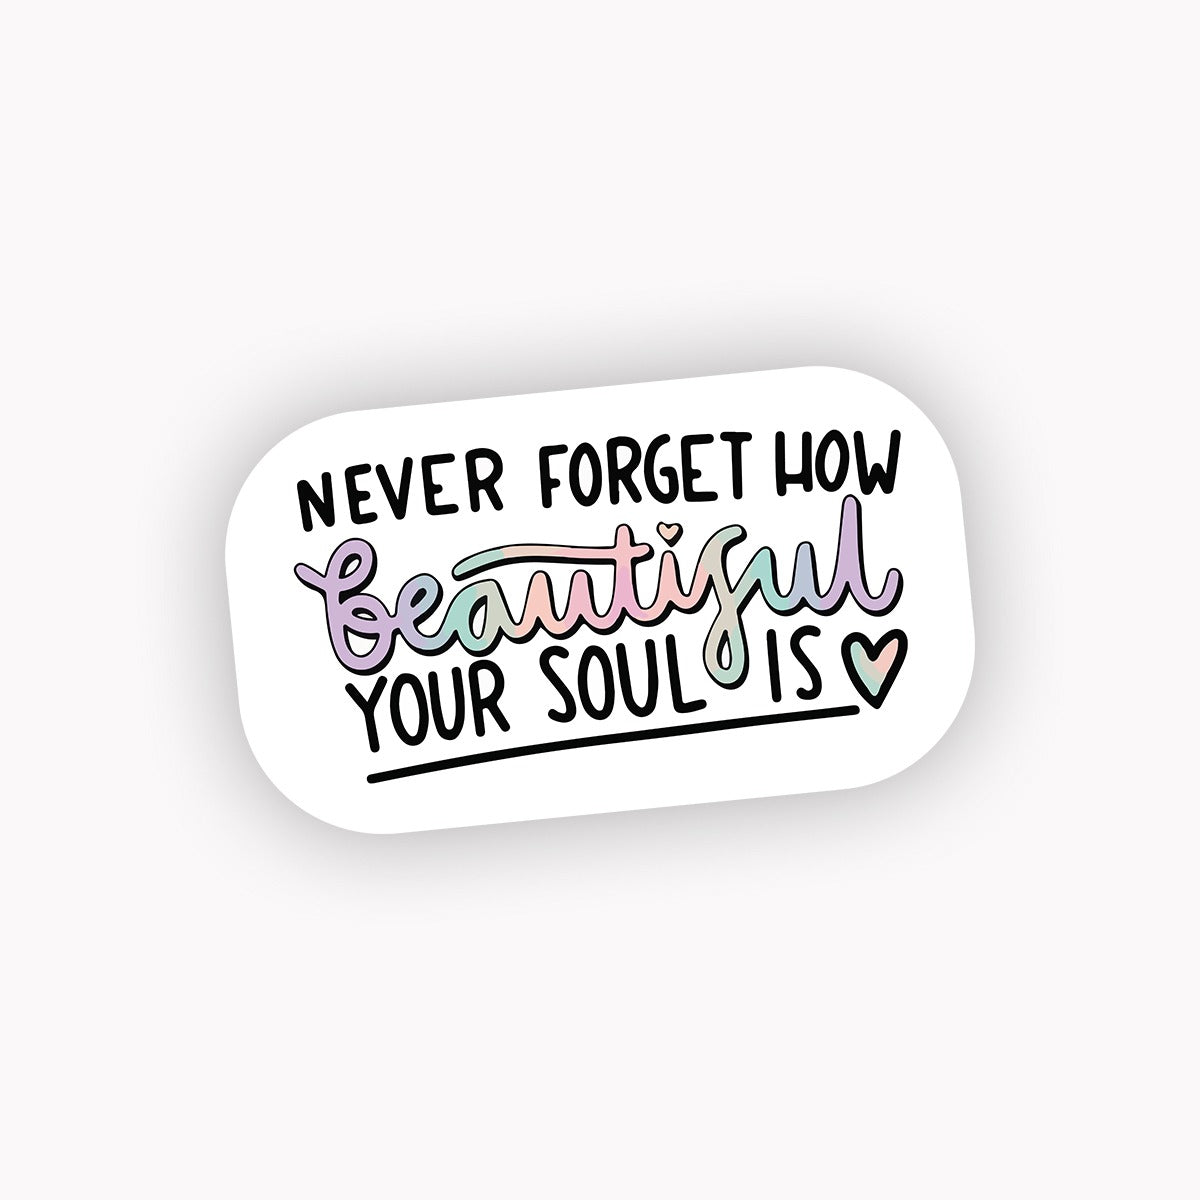 Never forget how beautiful your soul is